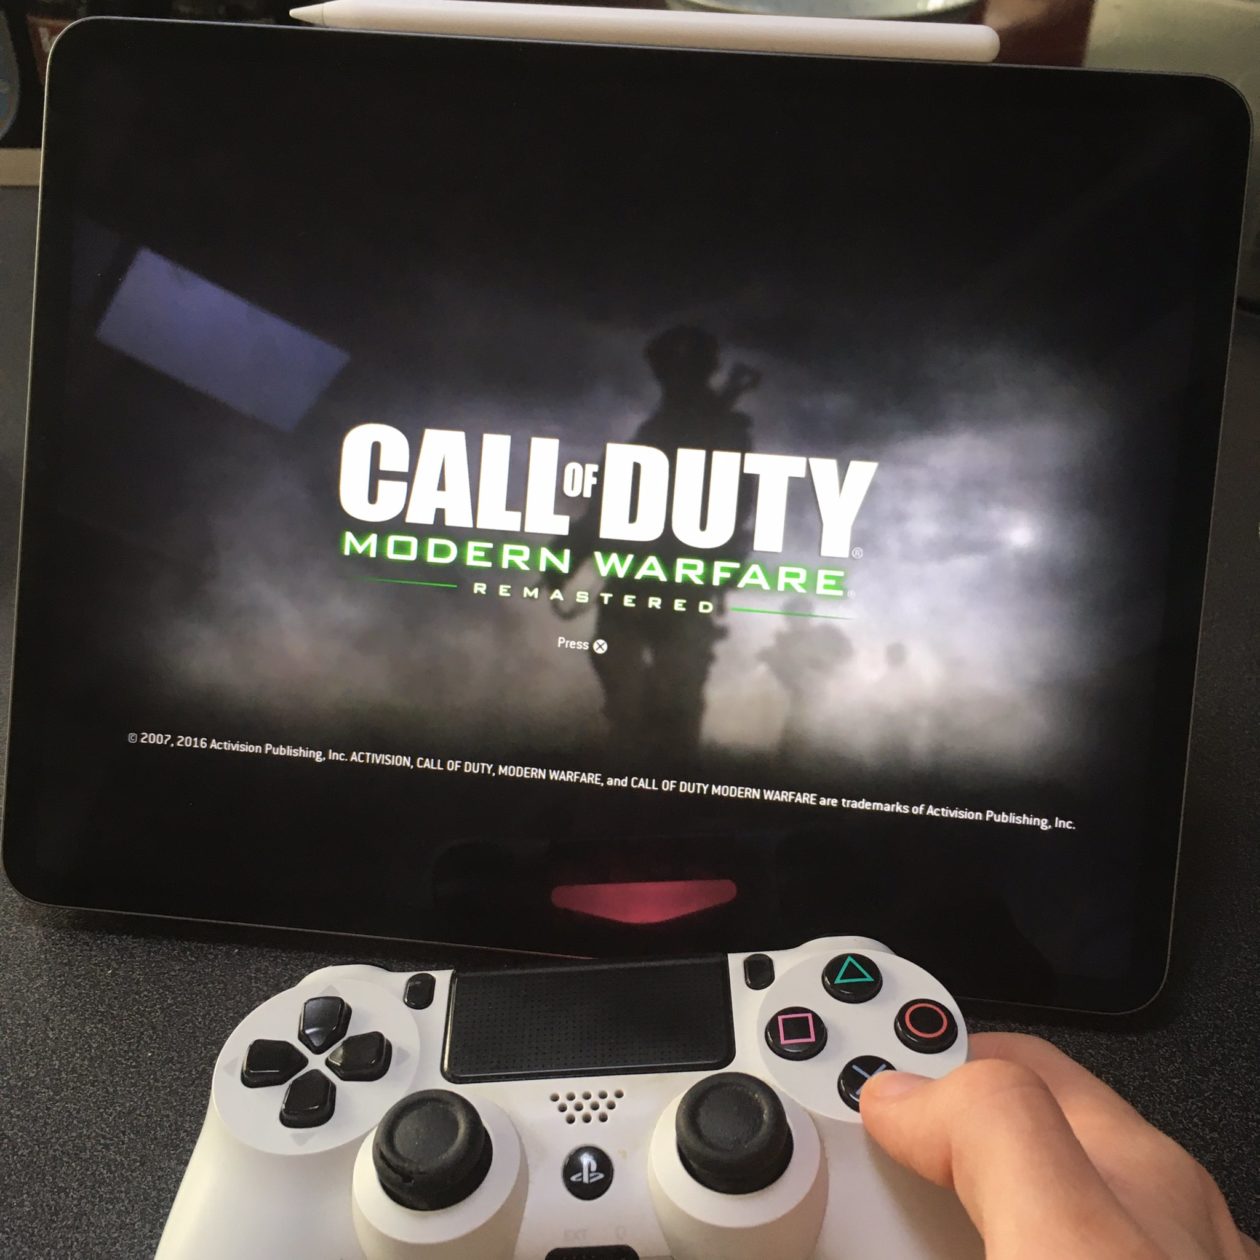 DualShock 4 support on iOS / iPadOS 13 will turn iPhones and iPads into “PS4s Mobile” with Remote Play app